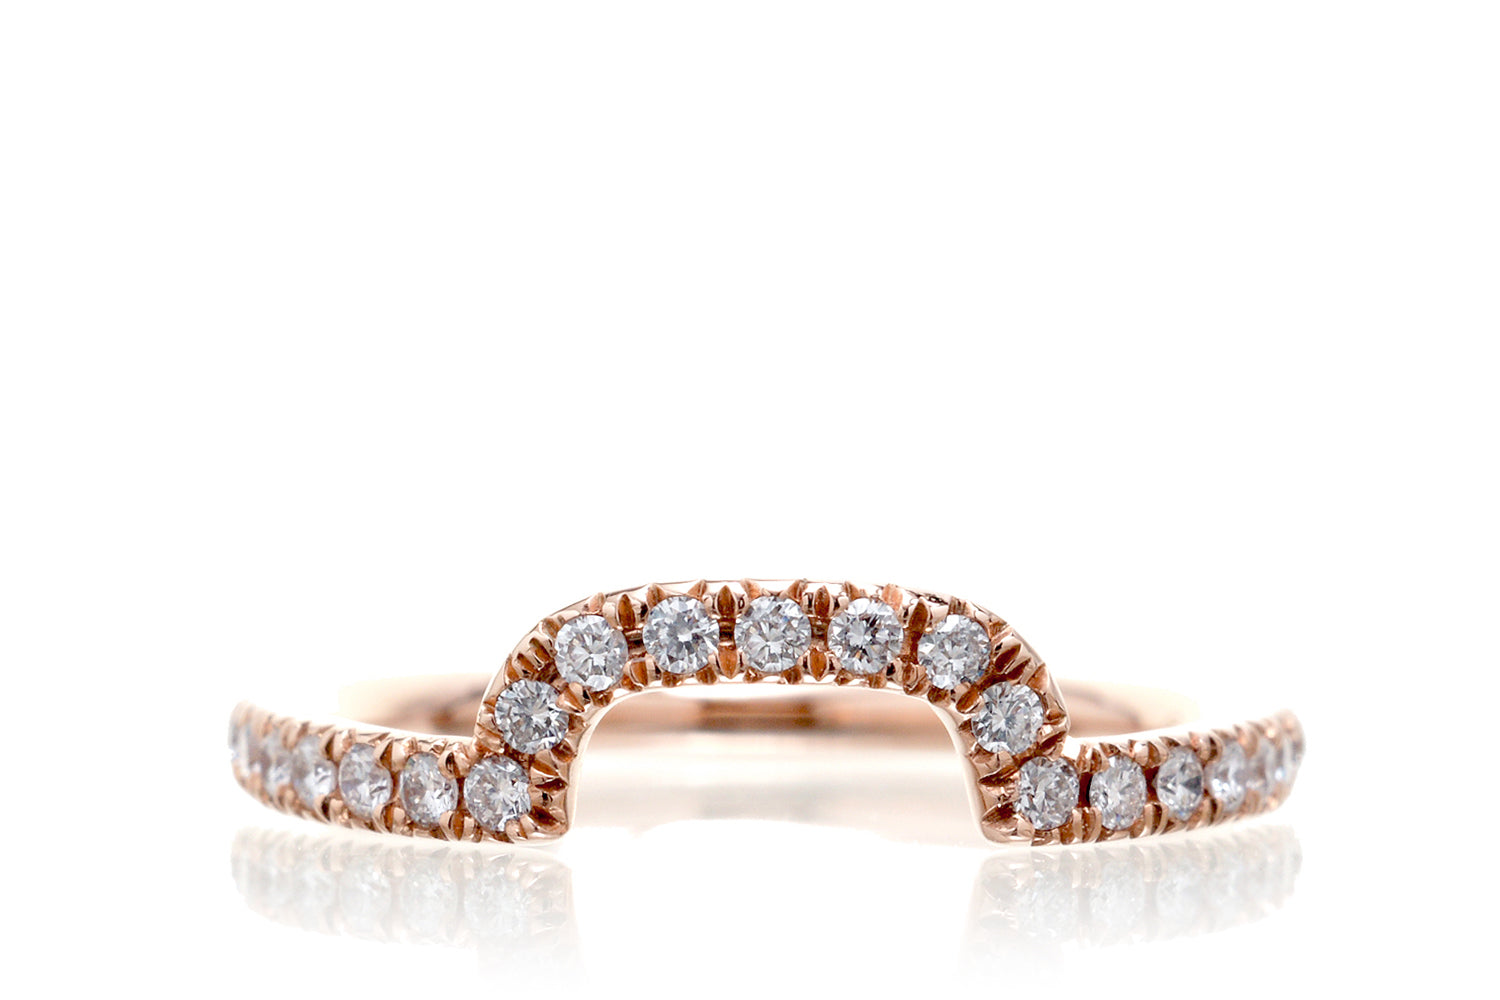 The Drenched Curved Diamond Band